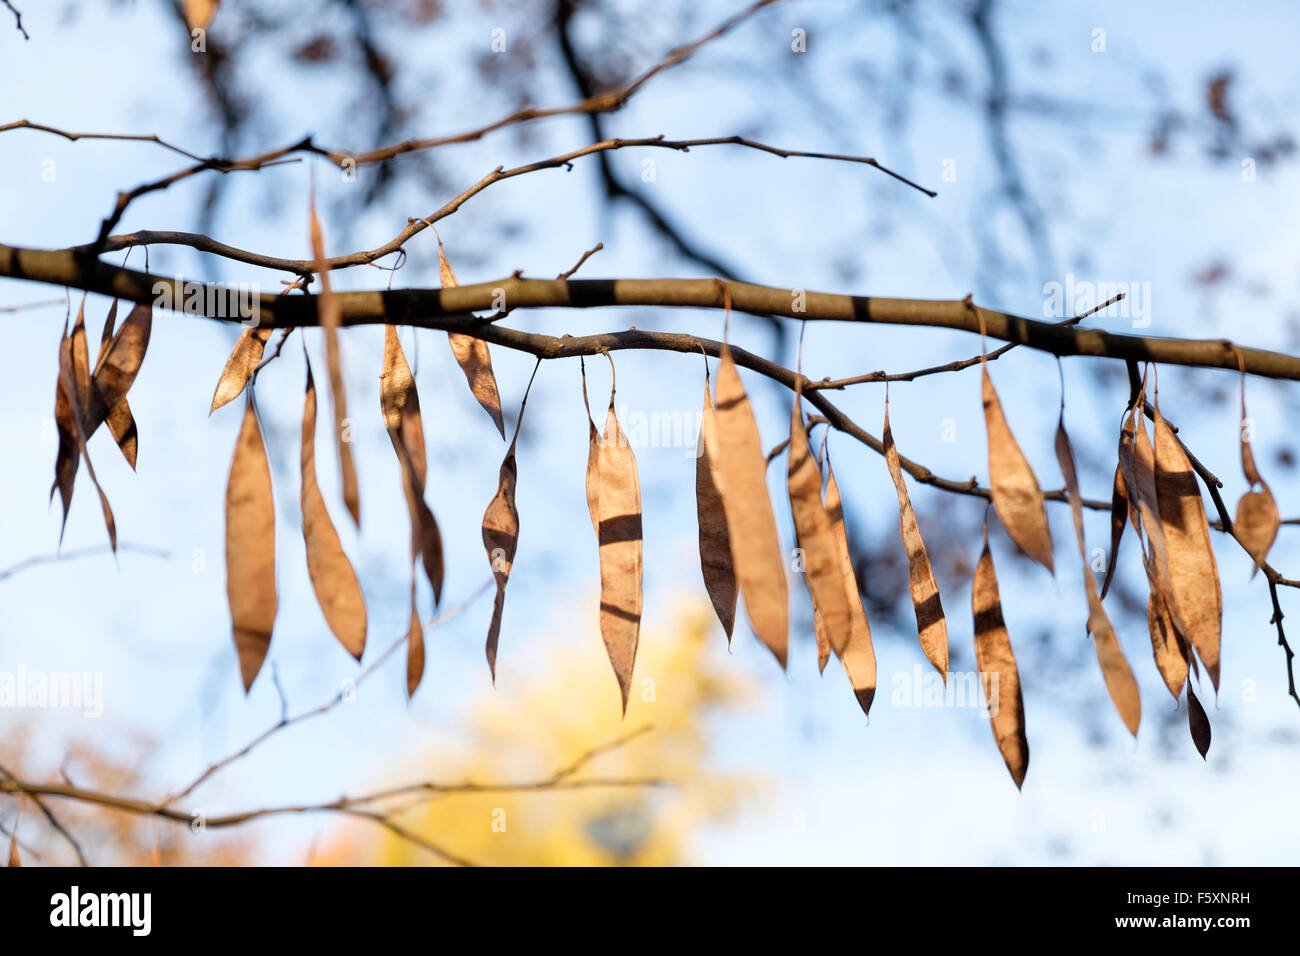 Seed pods of an eastern redbud tree, a small deciduous shrub native to North America. Stock Photo